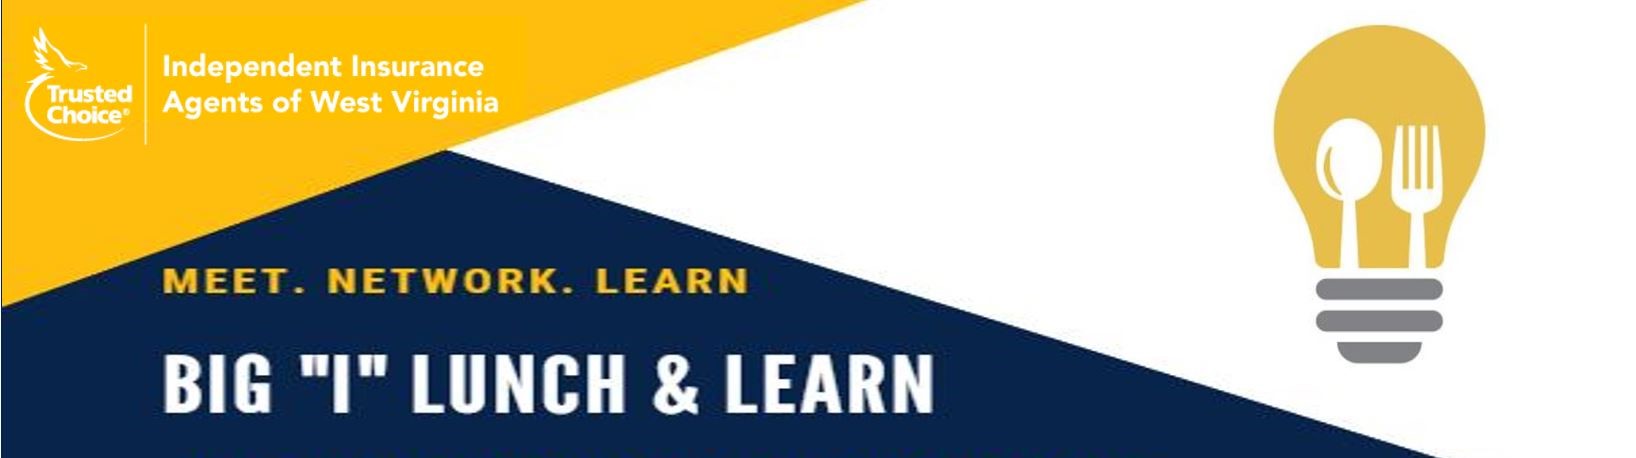 Lunch and Learn Website Banner.JPG